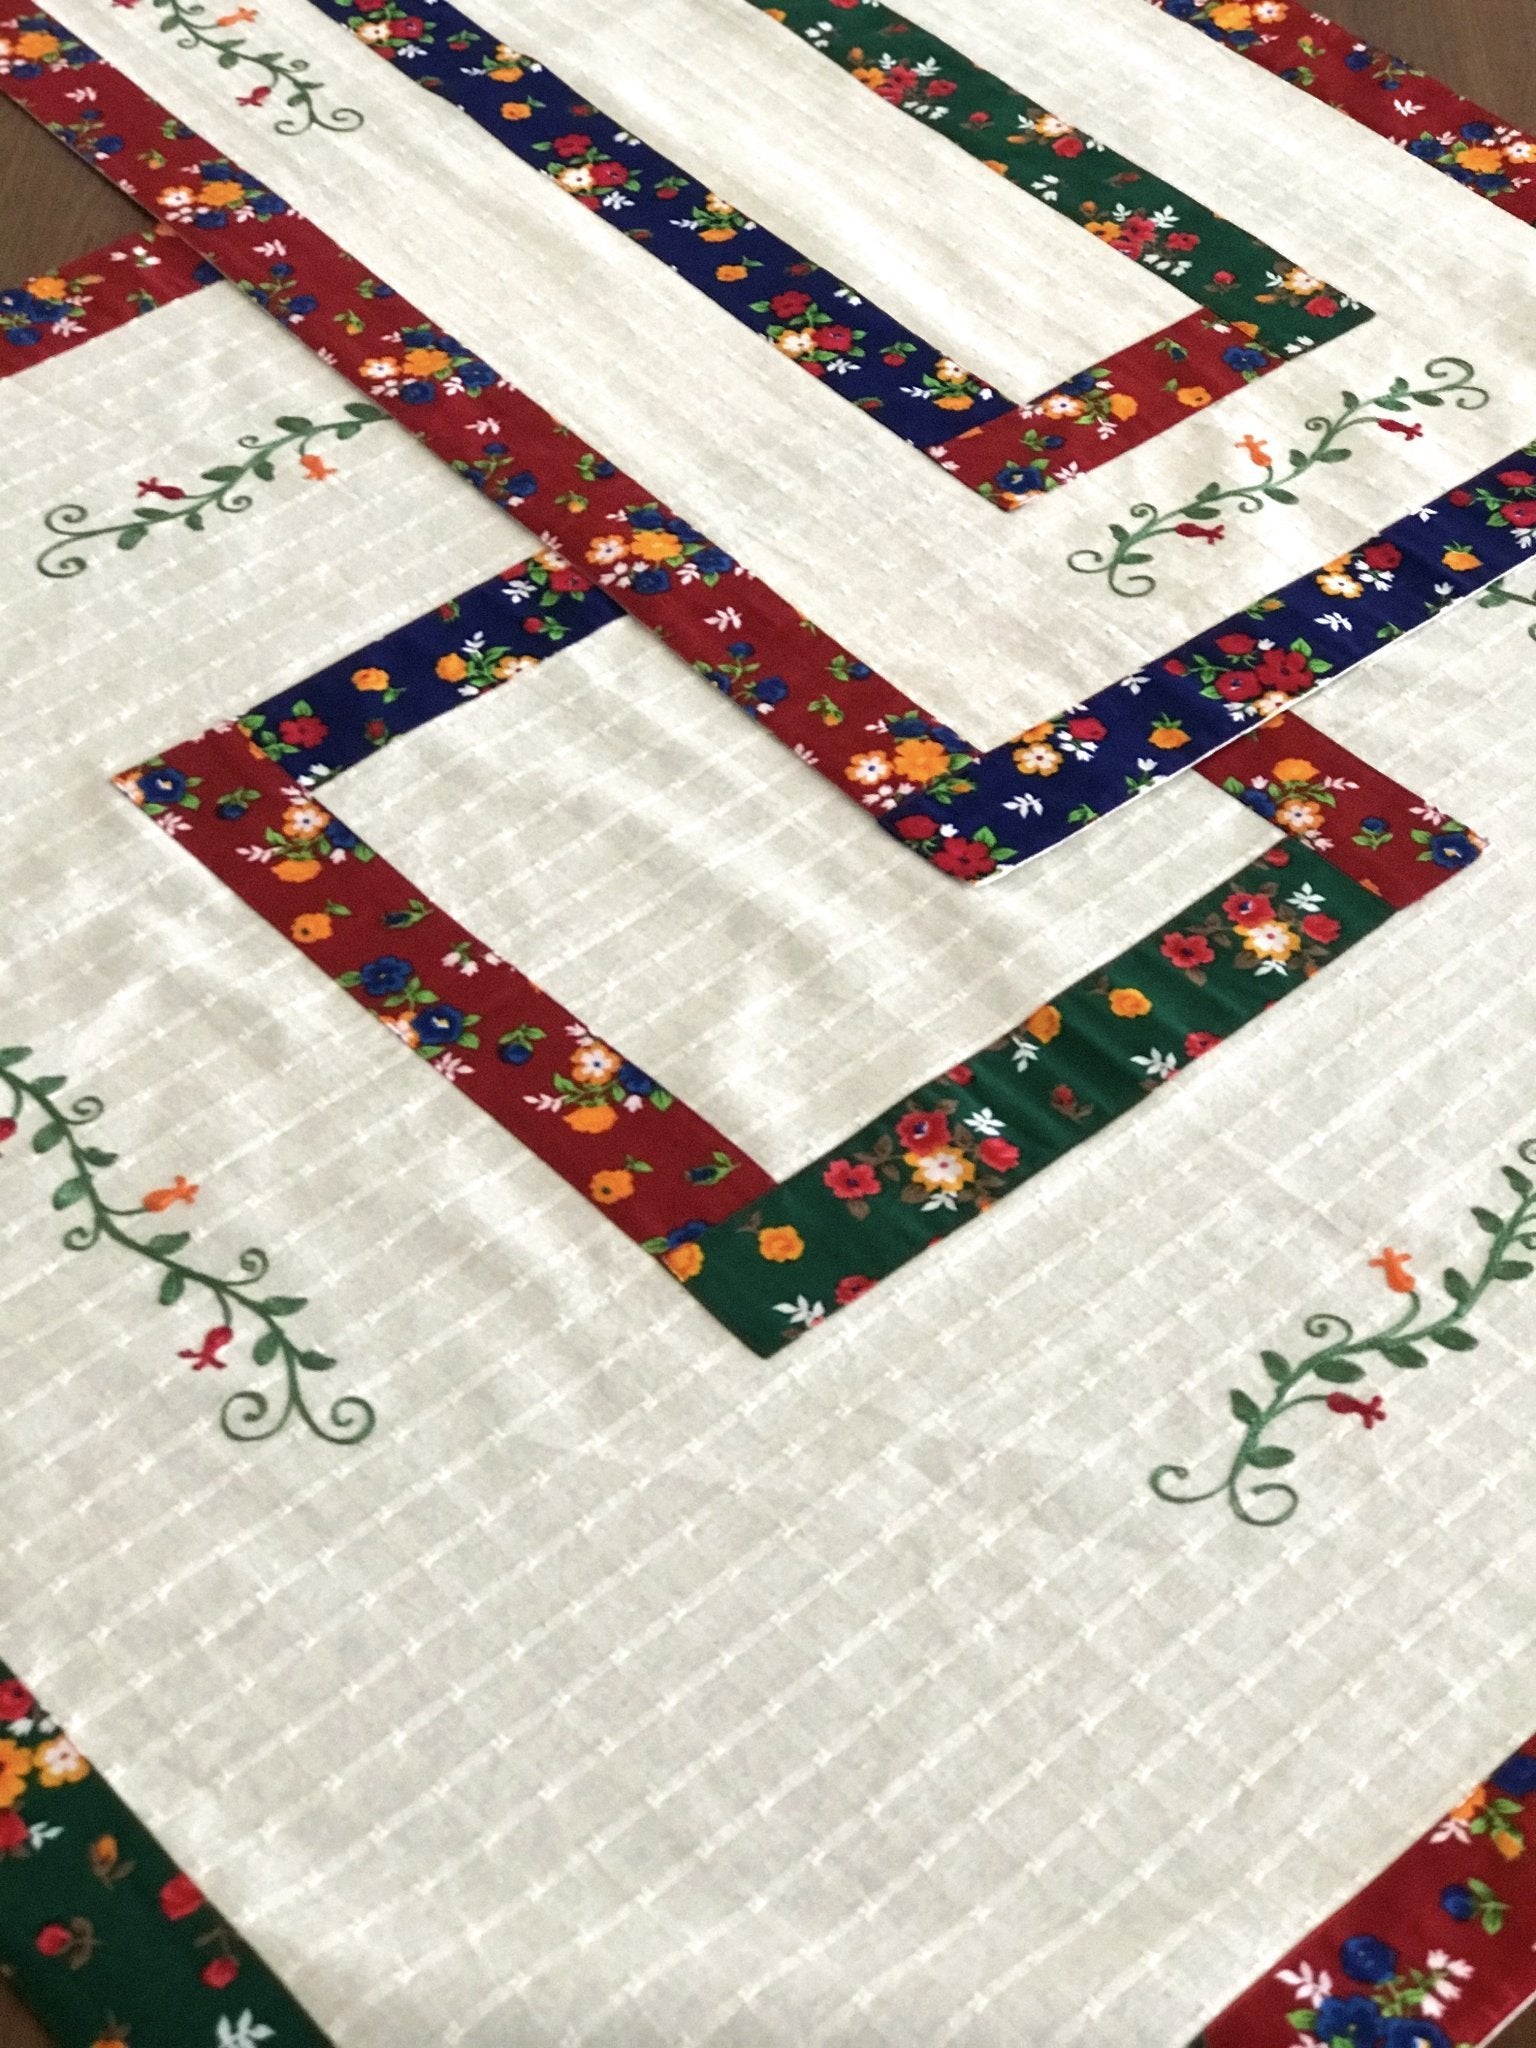 Ethnic Table Runners | creativehome-designs